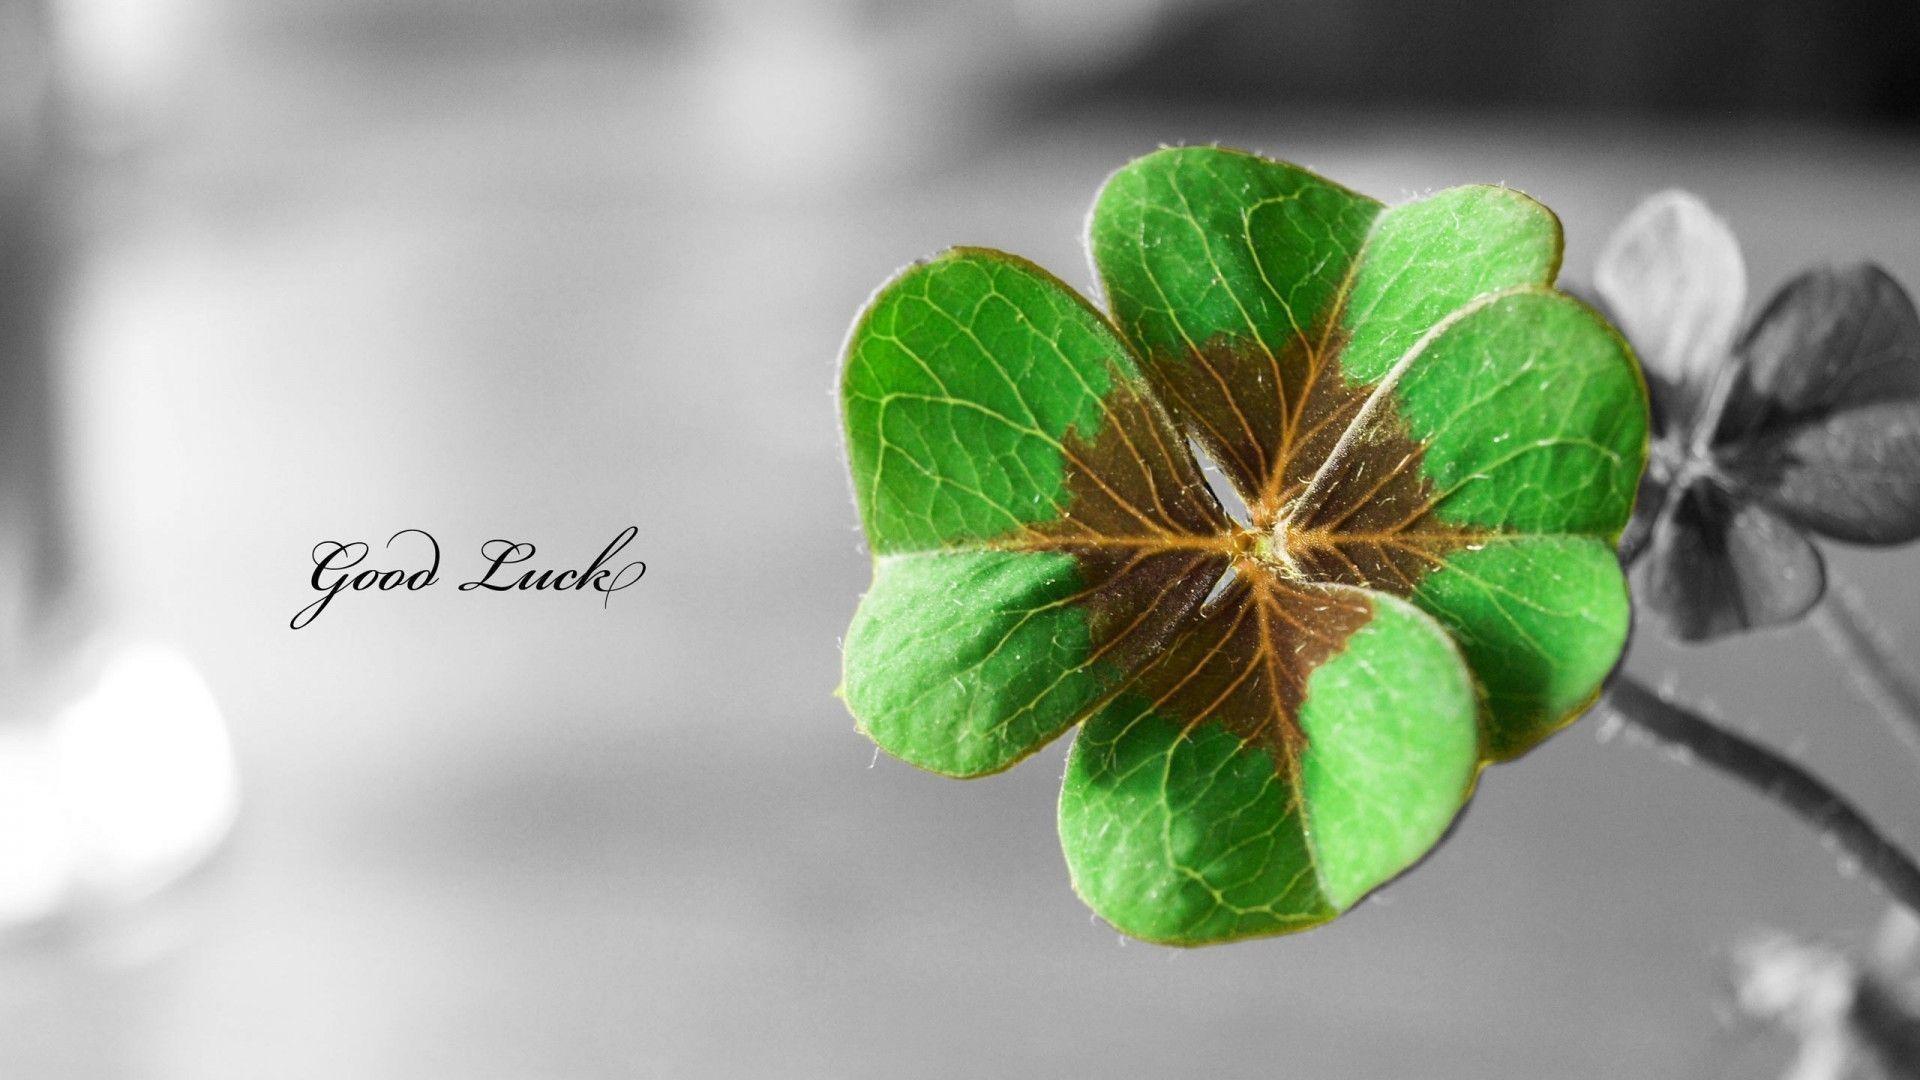 Good Luck Photos Download The BEST Free Good Luck Stock Photos  HD Images